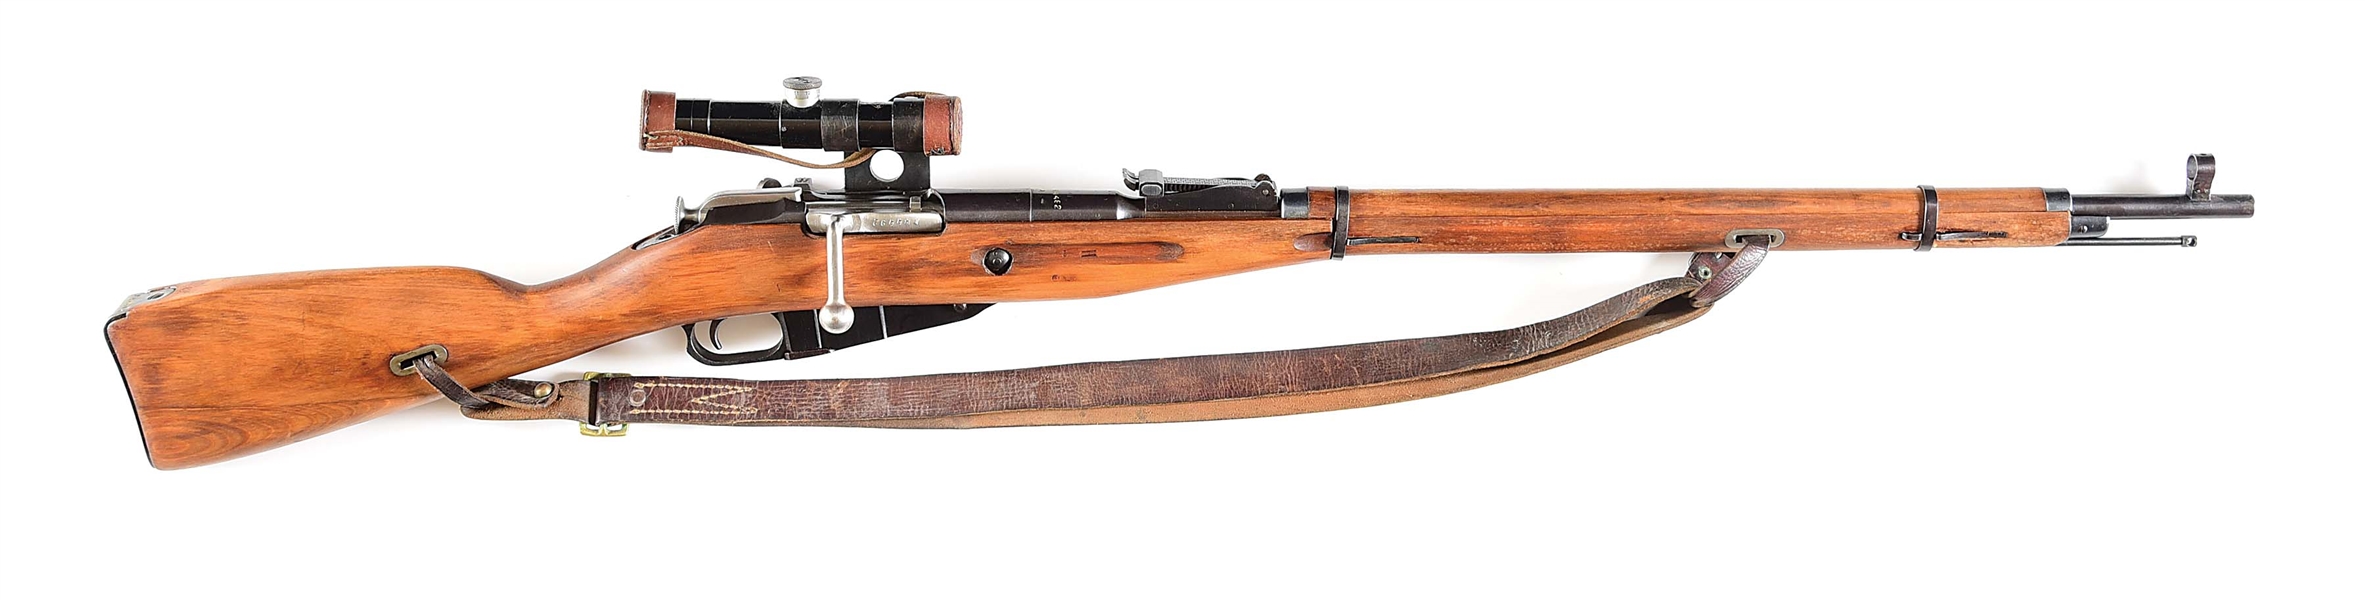 (C) RUSSIAN WORLD WAR II IZHEVSK 91/30 PU BOLT ACTION SNIPER RIFLE WITH SCOPE COVER & CLEANING KIT.